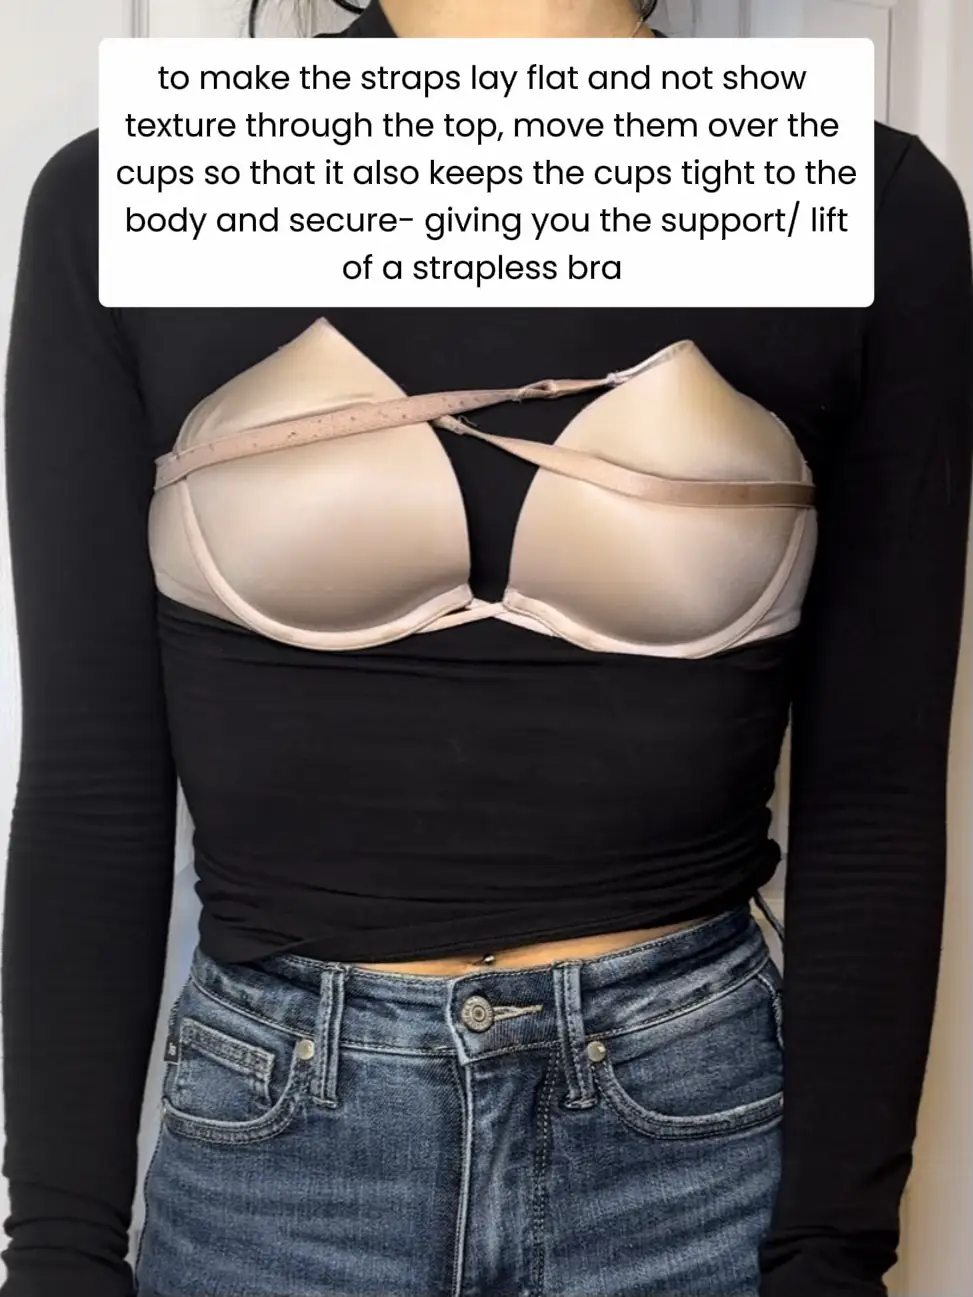 Shoppers With E-Cup Busts Are Comfortably Going Braless Thanks to This  Best-Selling Style Hack - Yahoo Sports